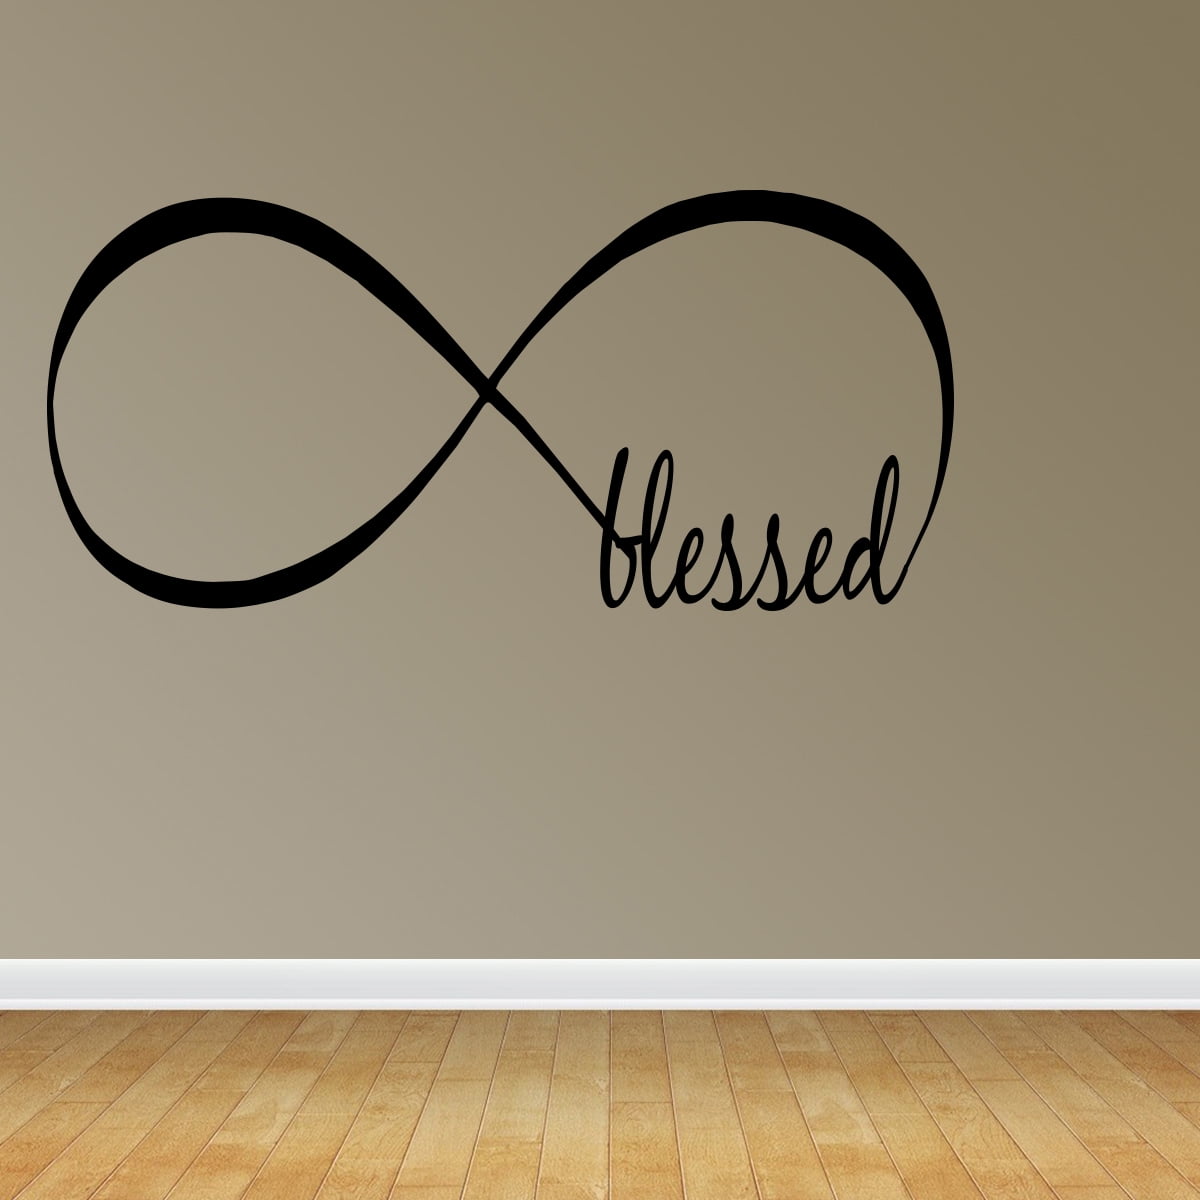 Simply Blessed Wall Car Sticker Vinyl Decal Laptop Bumper Windscreen Adhesive BL 